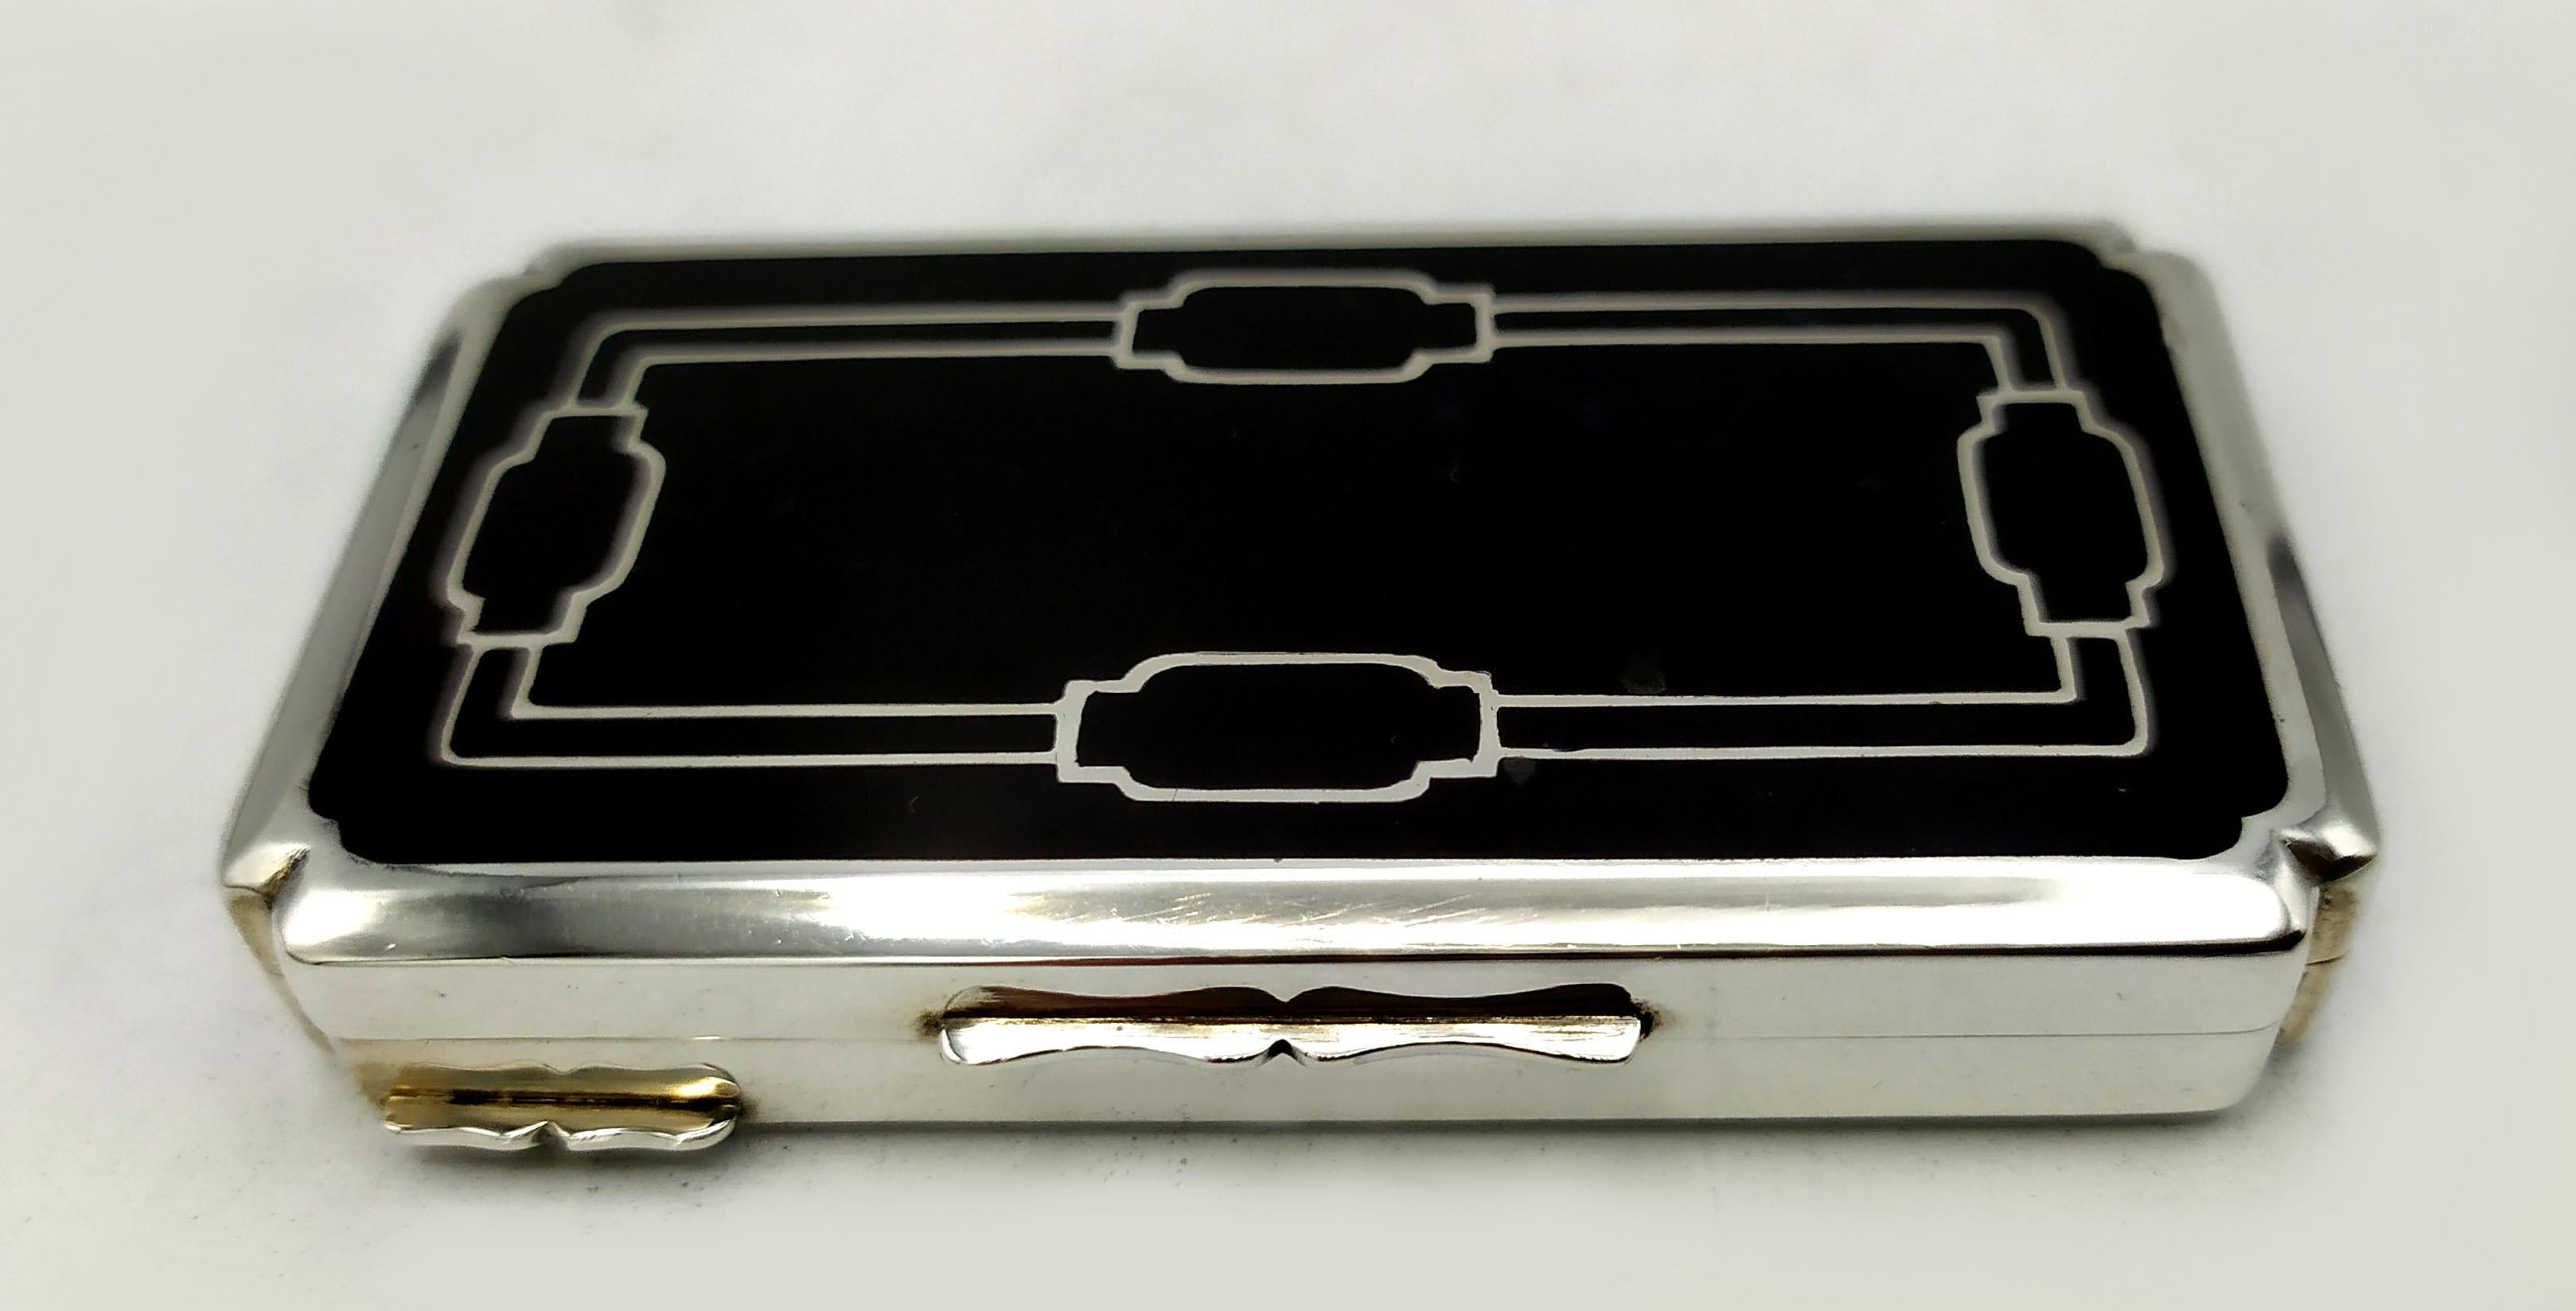 Snuff Box Silver is in 925/1000 sterling.
Snuff Box Silver has black fired enamels on guilloché.
Snuff Box Silver has  a lid with geometric design engraved by hand.
Snuff Box Silver Sterling is in Art Deco style.
Dimensions cm. 4 x 7.7 x 1.3. Weight